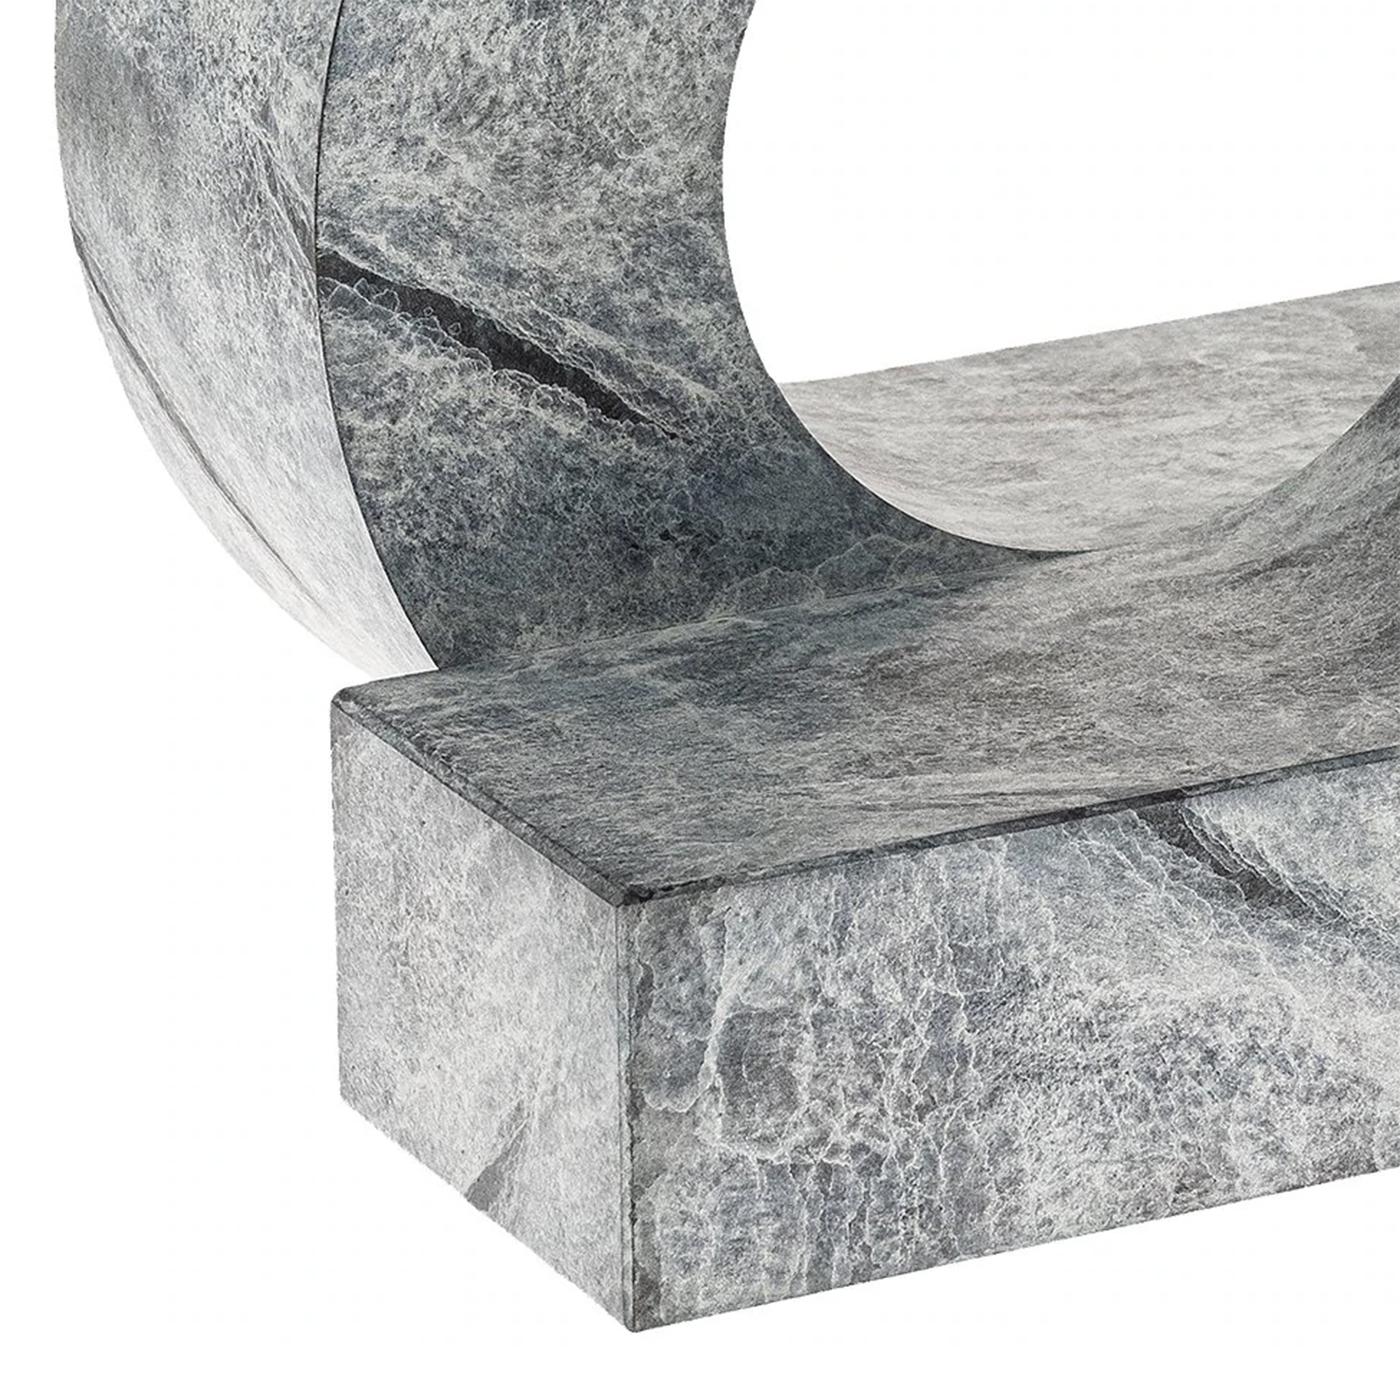 Sculpture universe marble finish all in
solid bronze with a marble patina finish.